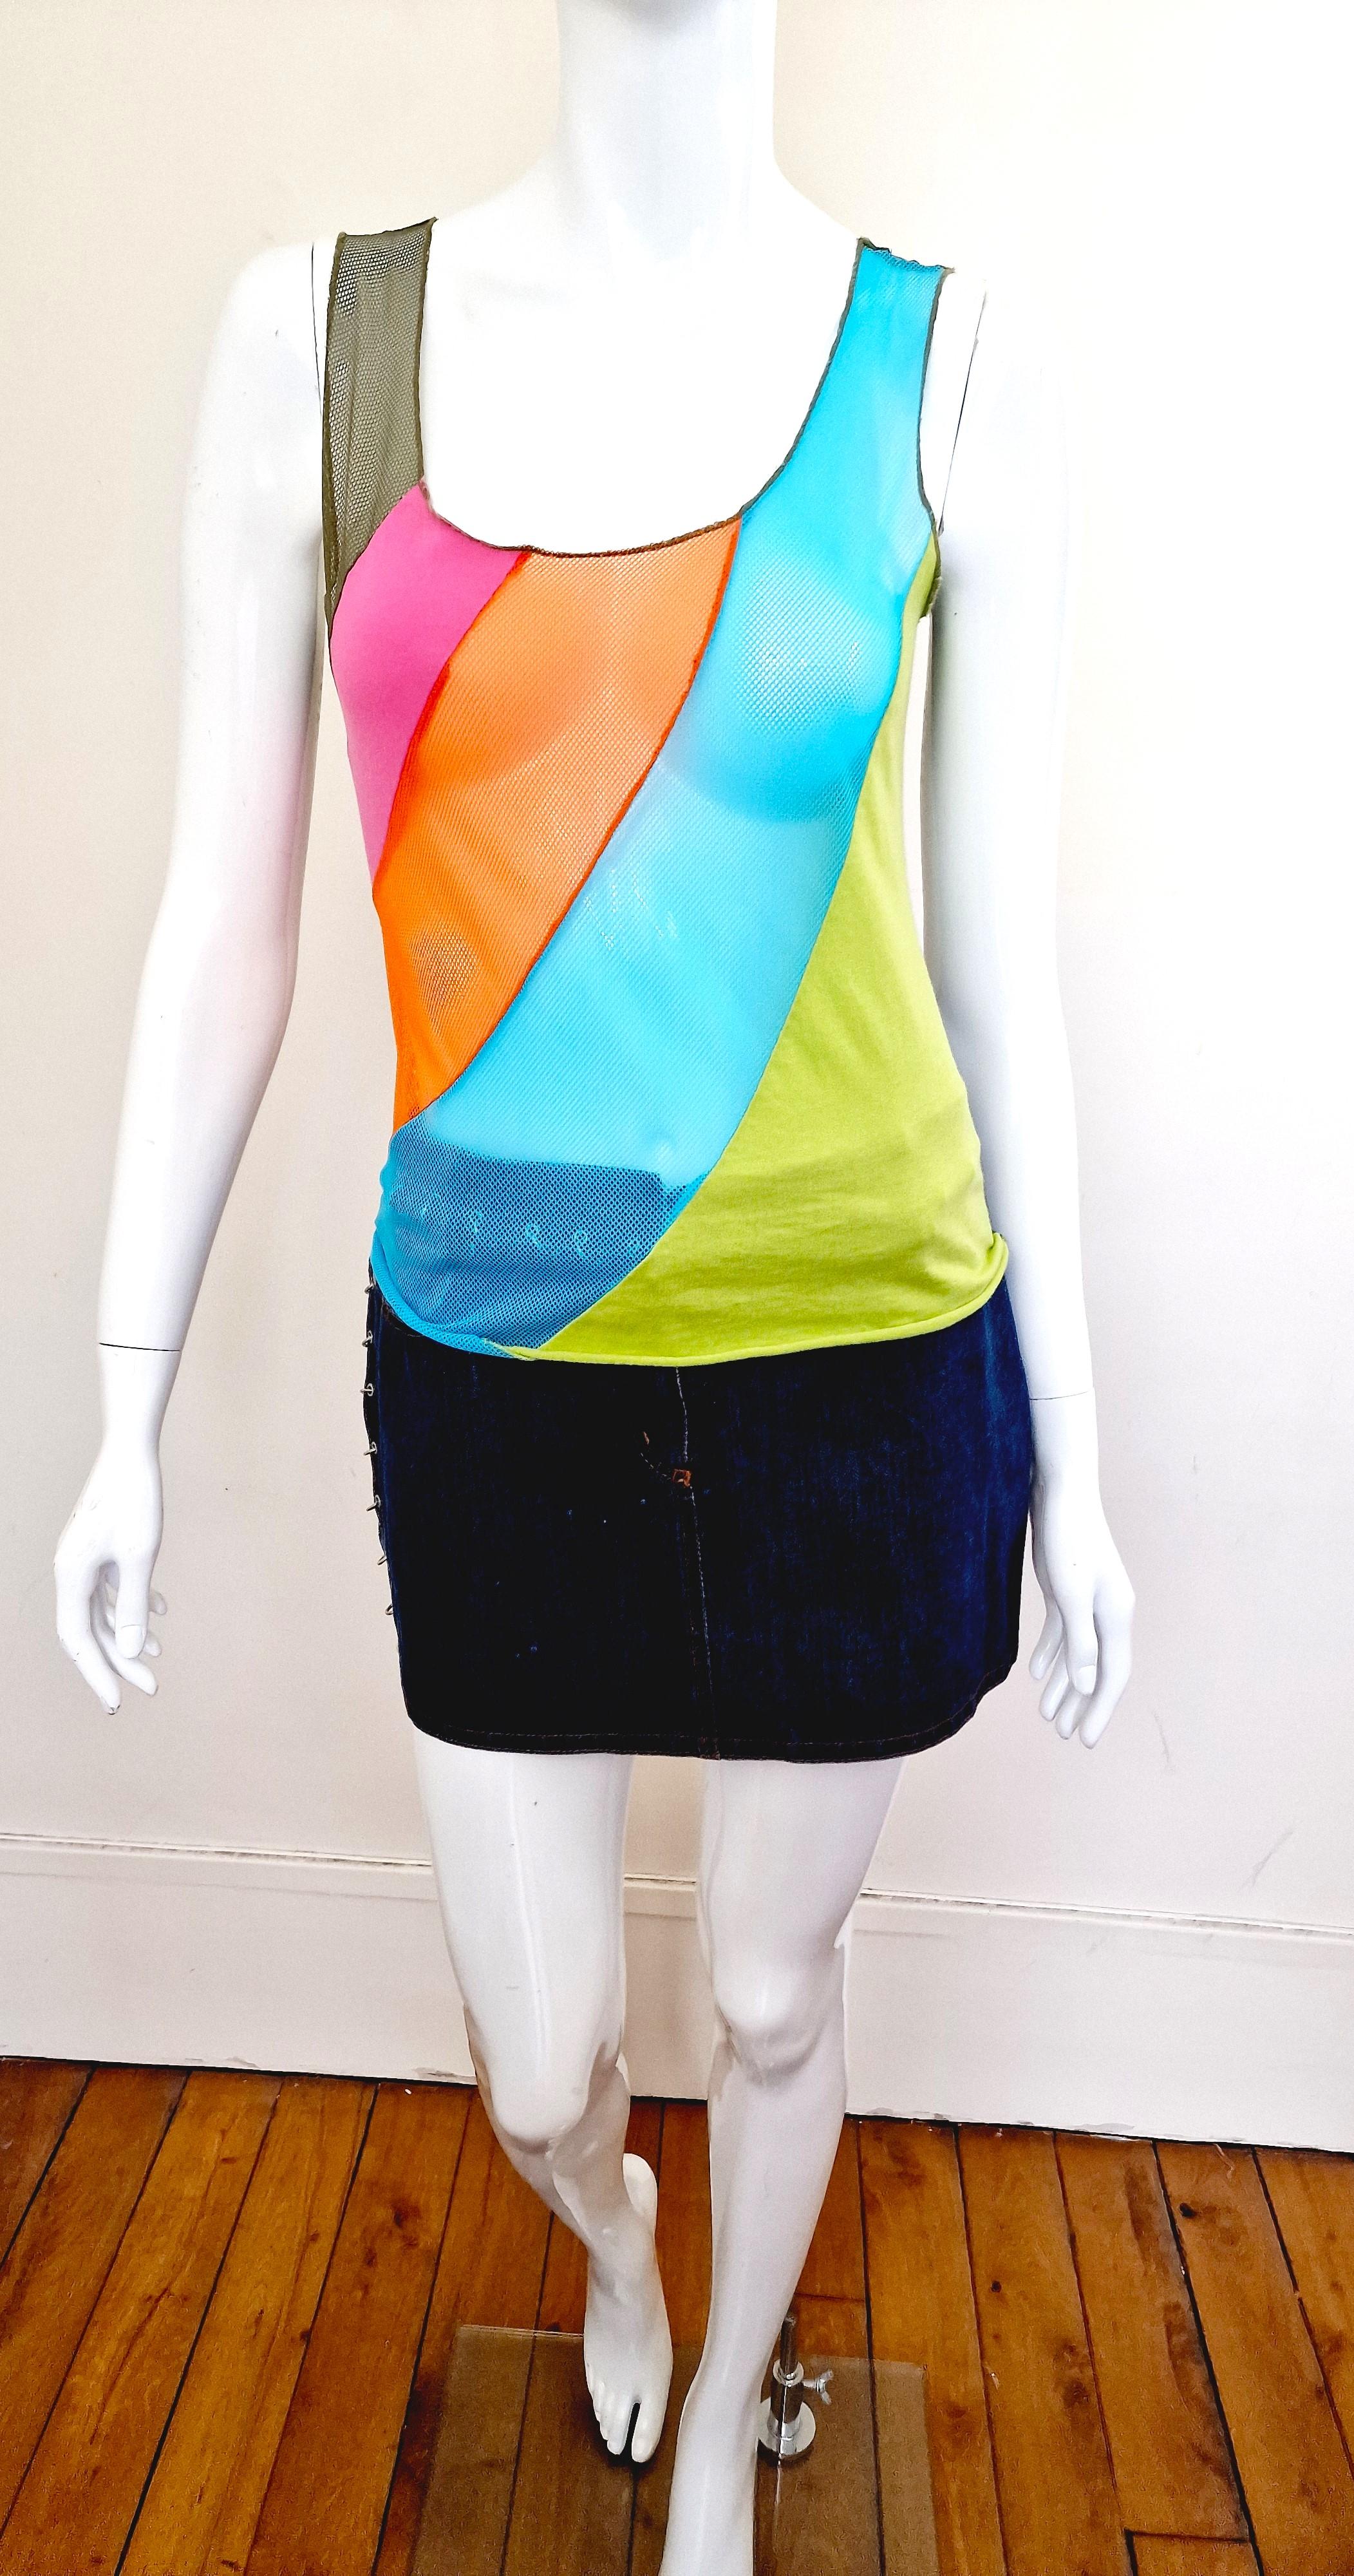 JC de Castelbajac super vintage net top!
From the eraly Castelbajac`s years!
Transparent.
Rainbow tab on the back.

LIKE NEW!

SIZE
Men: XS to small.
Women: from small to medium.
Marked size: medium.
Length: 58 cm / 22.8 inch
Bust: 41 cm / 16.1